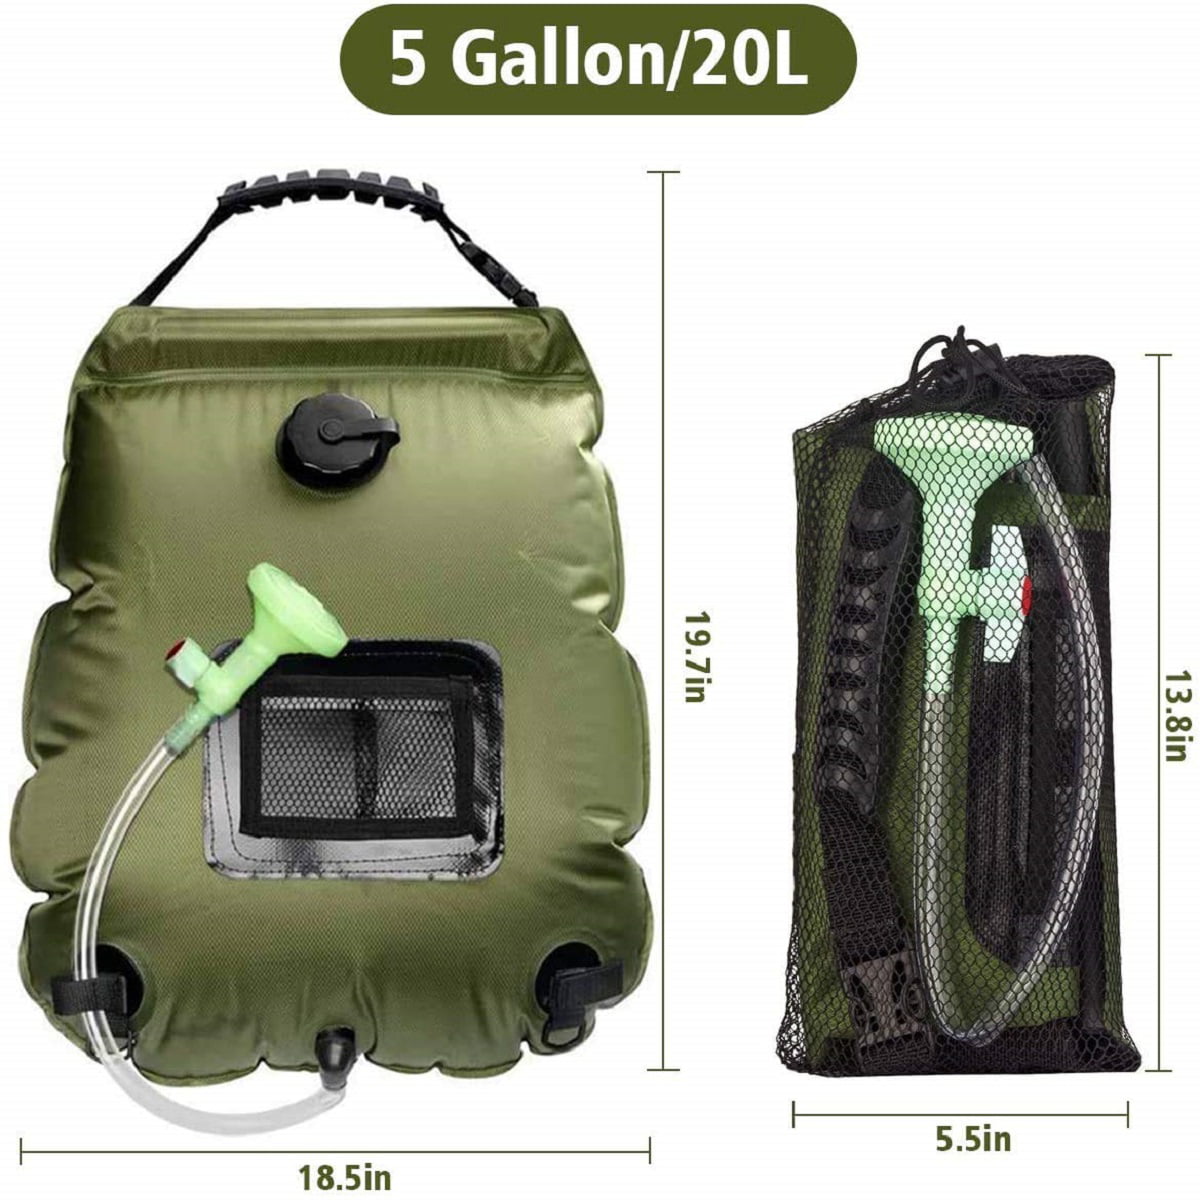 5 gallons/20L Solar Heating Camping Shower Bag Temperature Indicator Hot Water 45°C Hiking Climbing Camping Beach Swimming Outdoor Traveling Ezonedeal Solar Shower Bag 